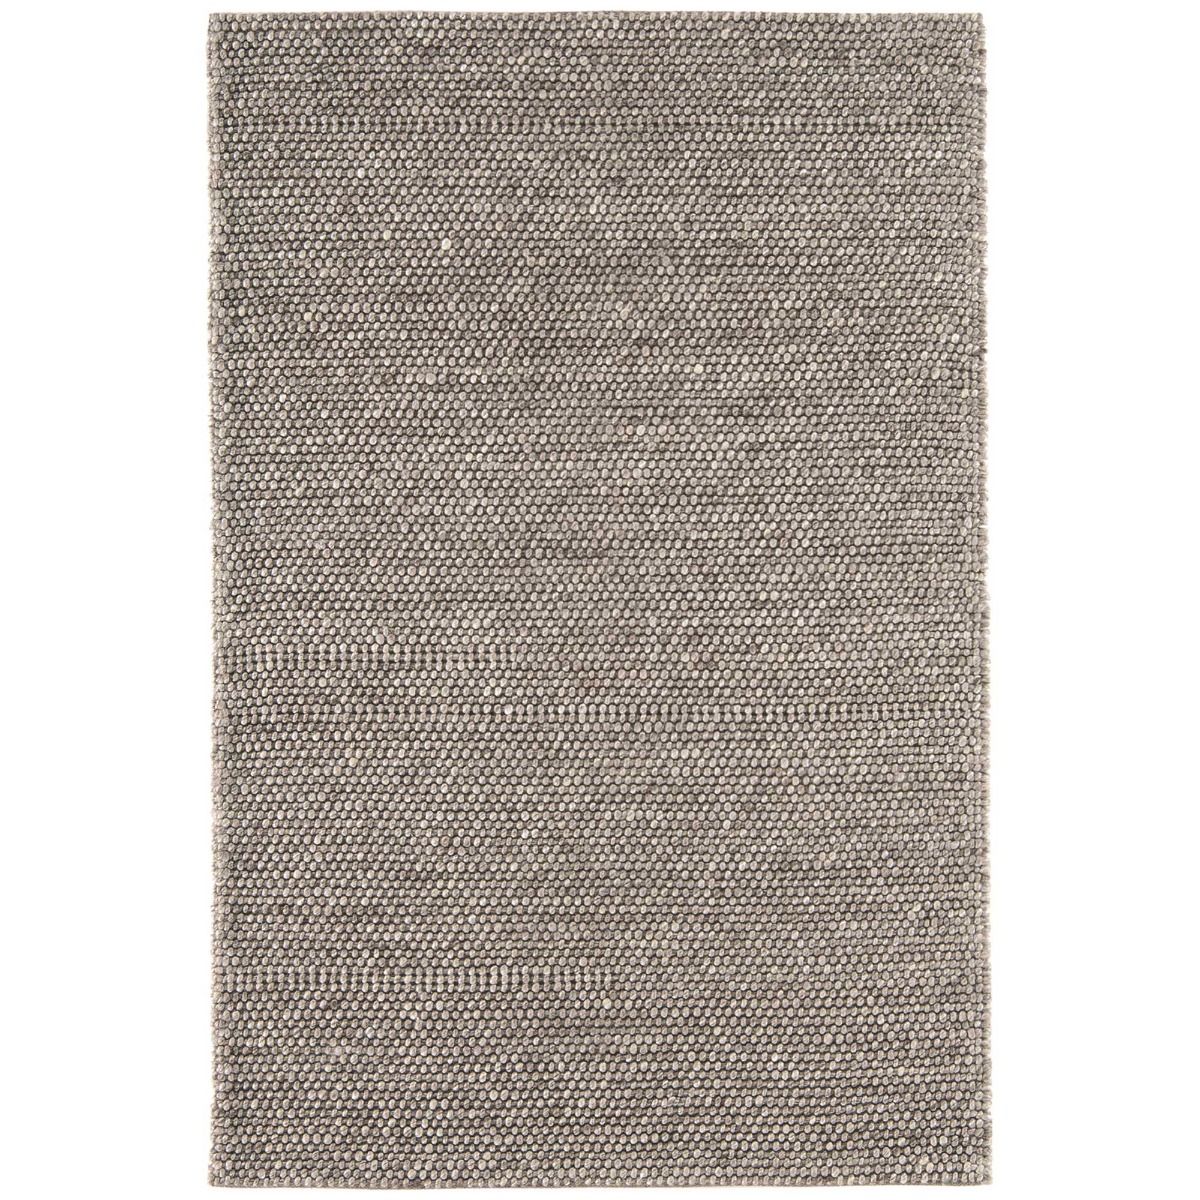 Flori Woven Taupe 120x170cm Rug, Square | W120cm | Barker & Stonehouse